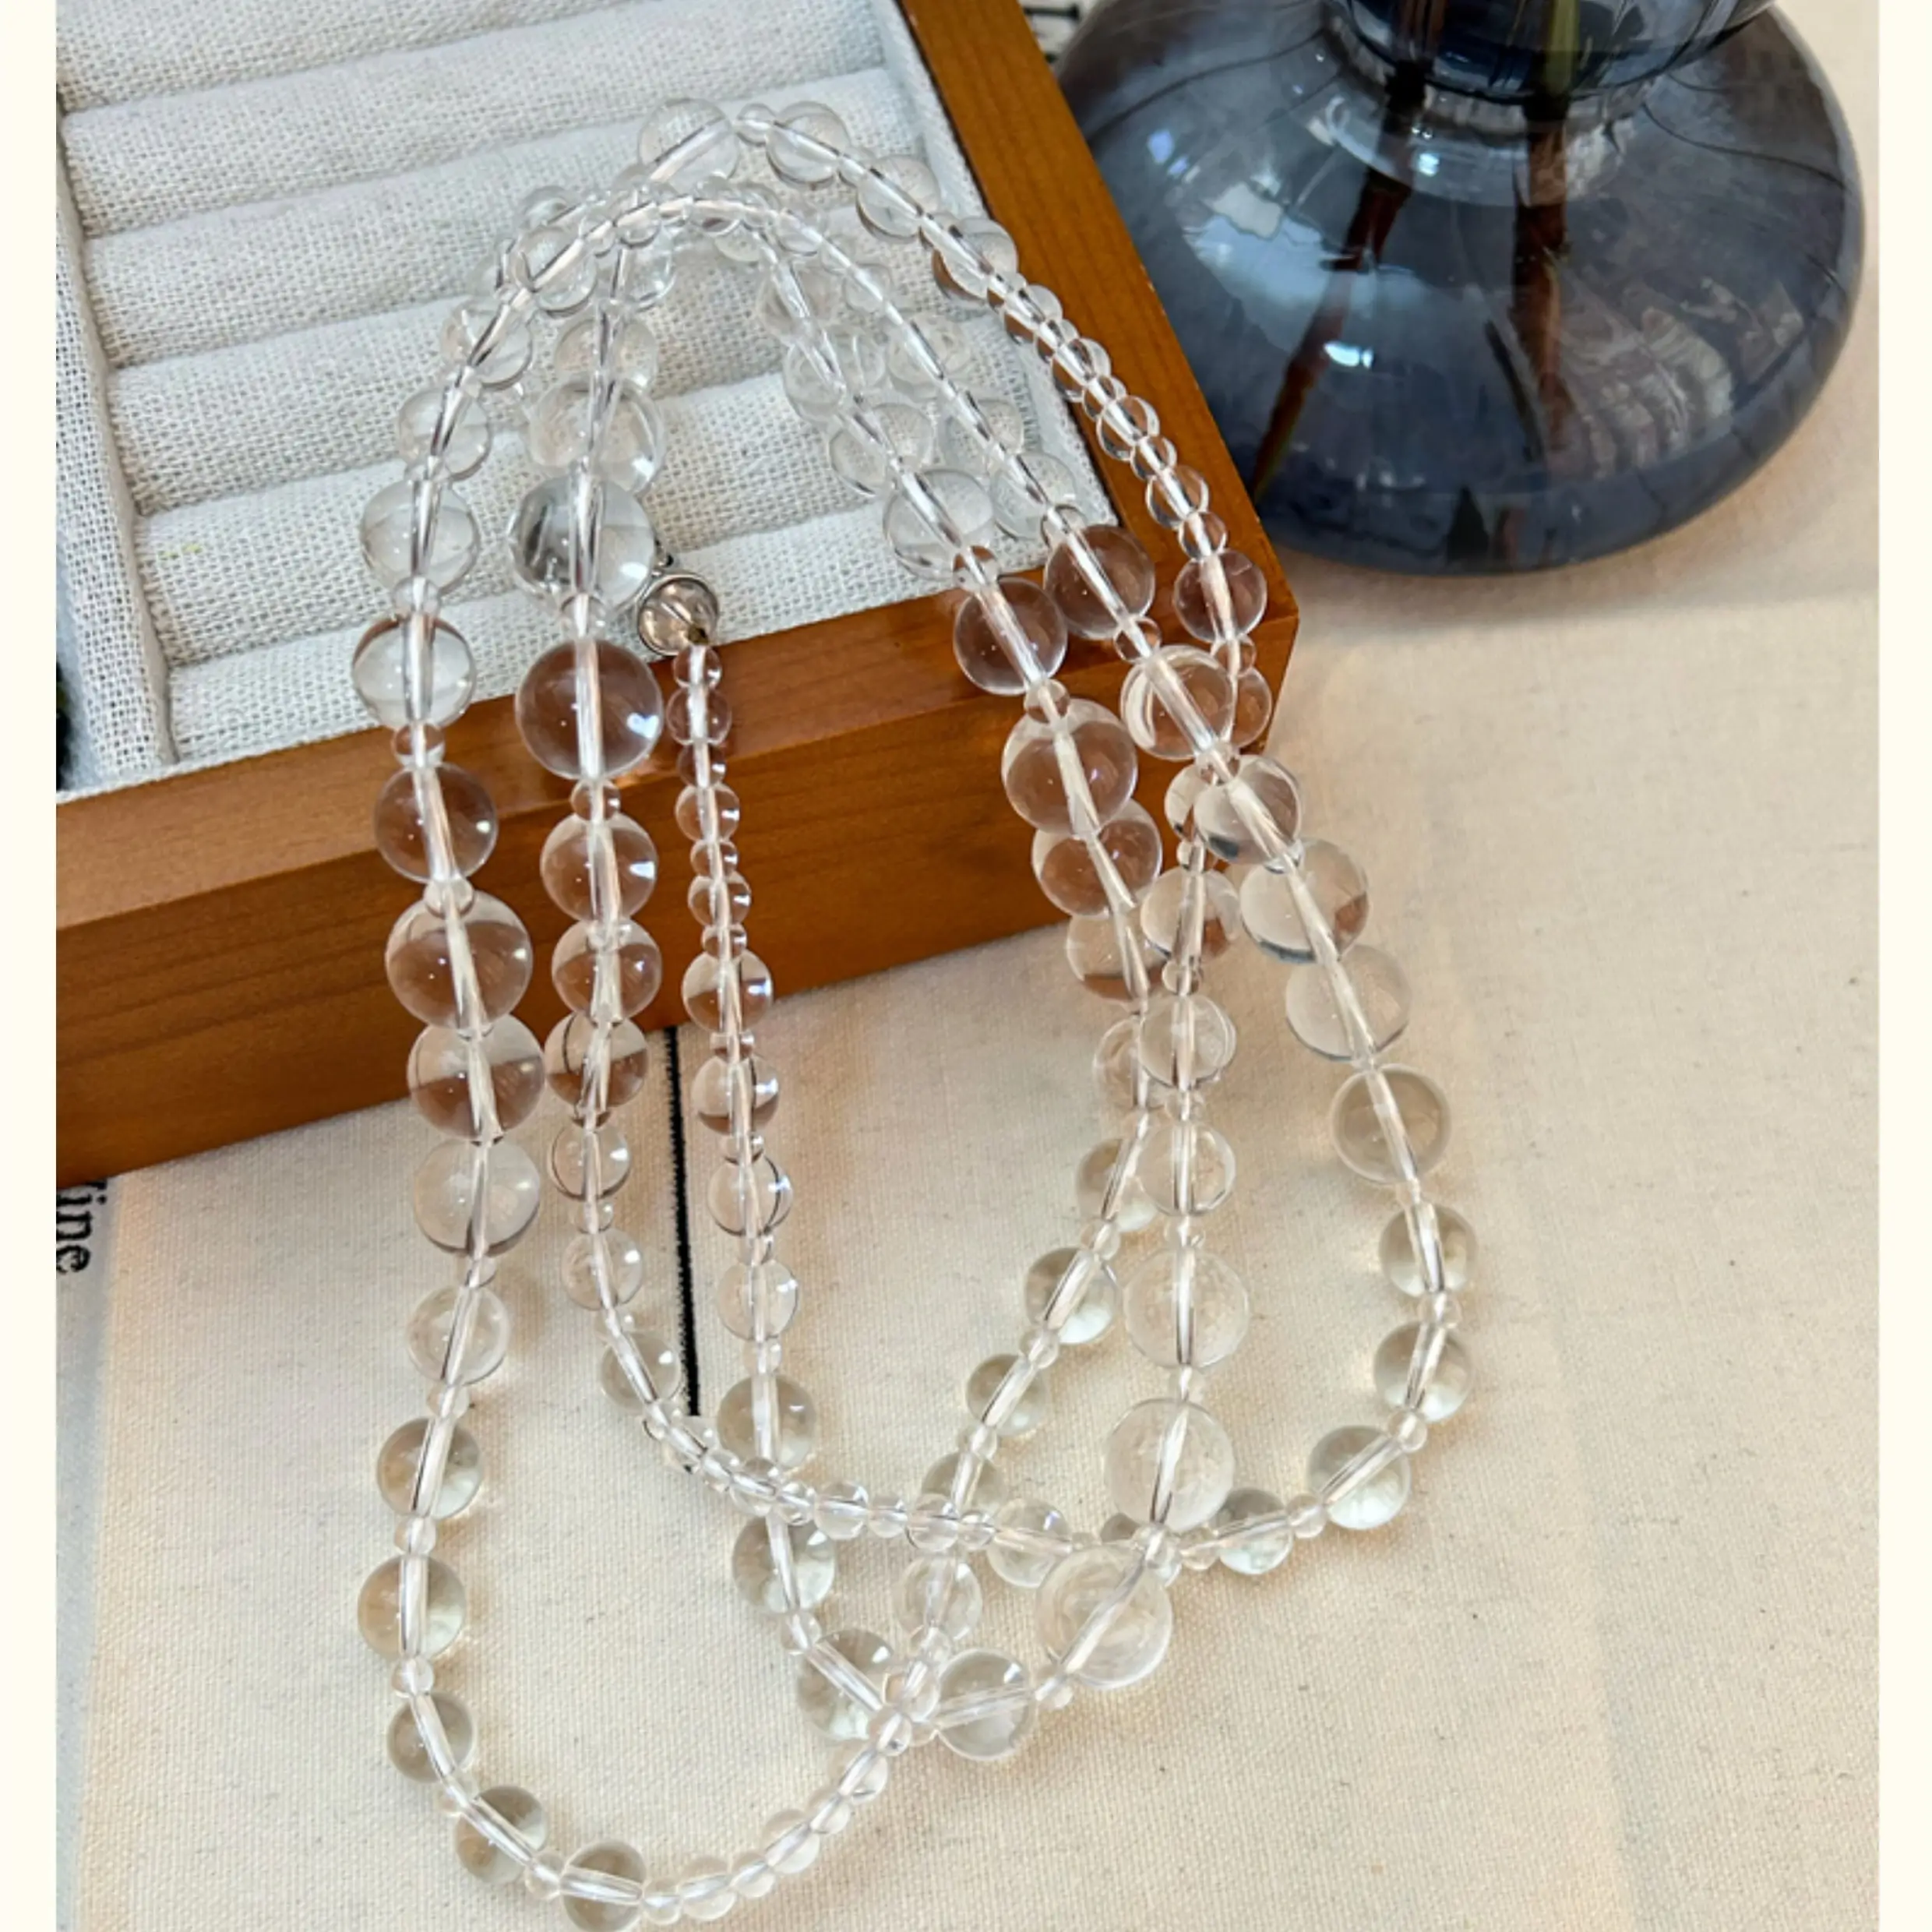 Clear beads Beaded Necklace transparent Long Necklace Women Jewelry